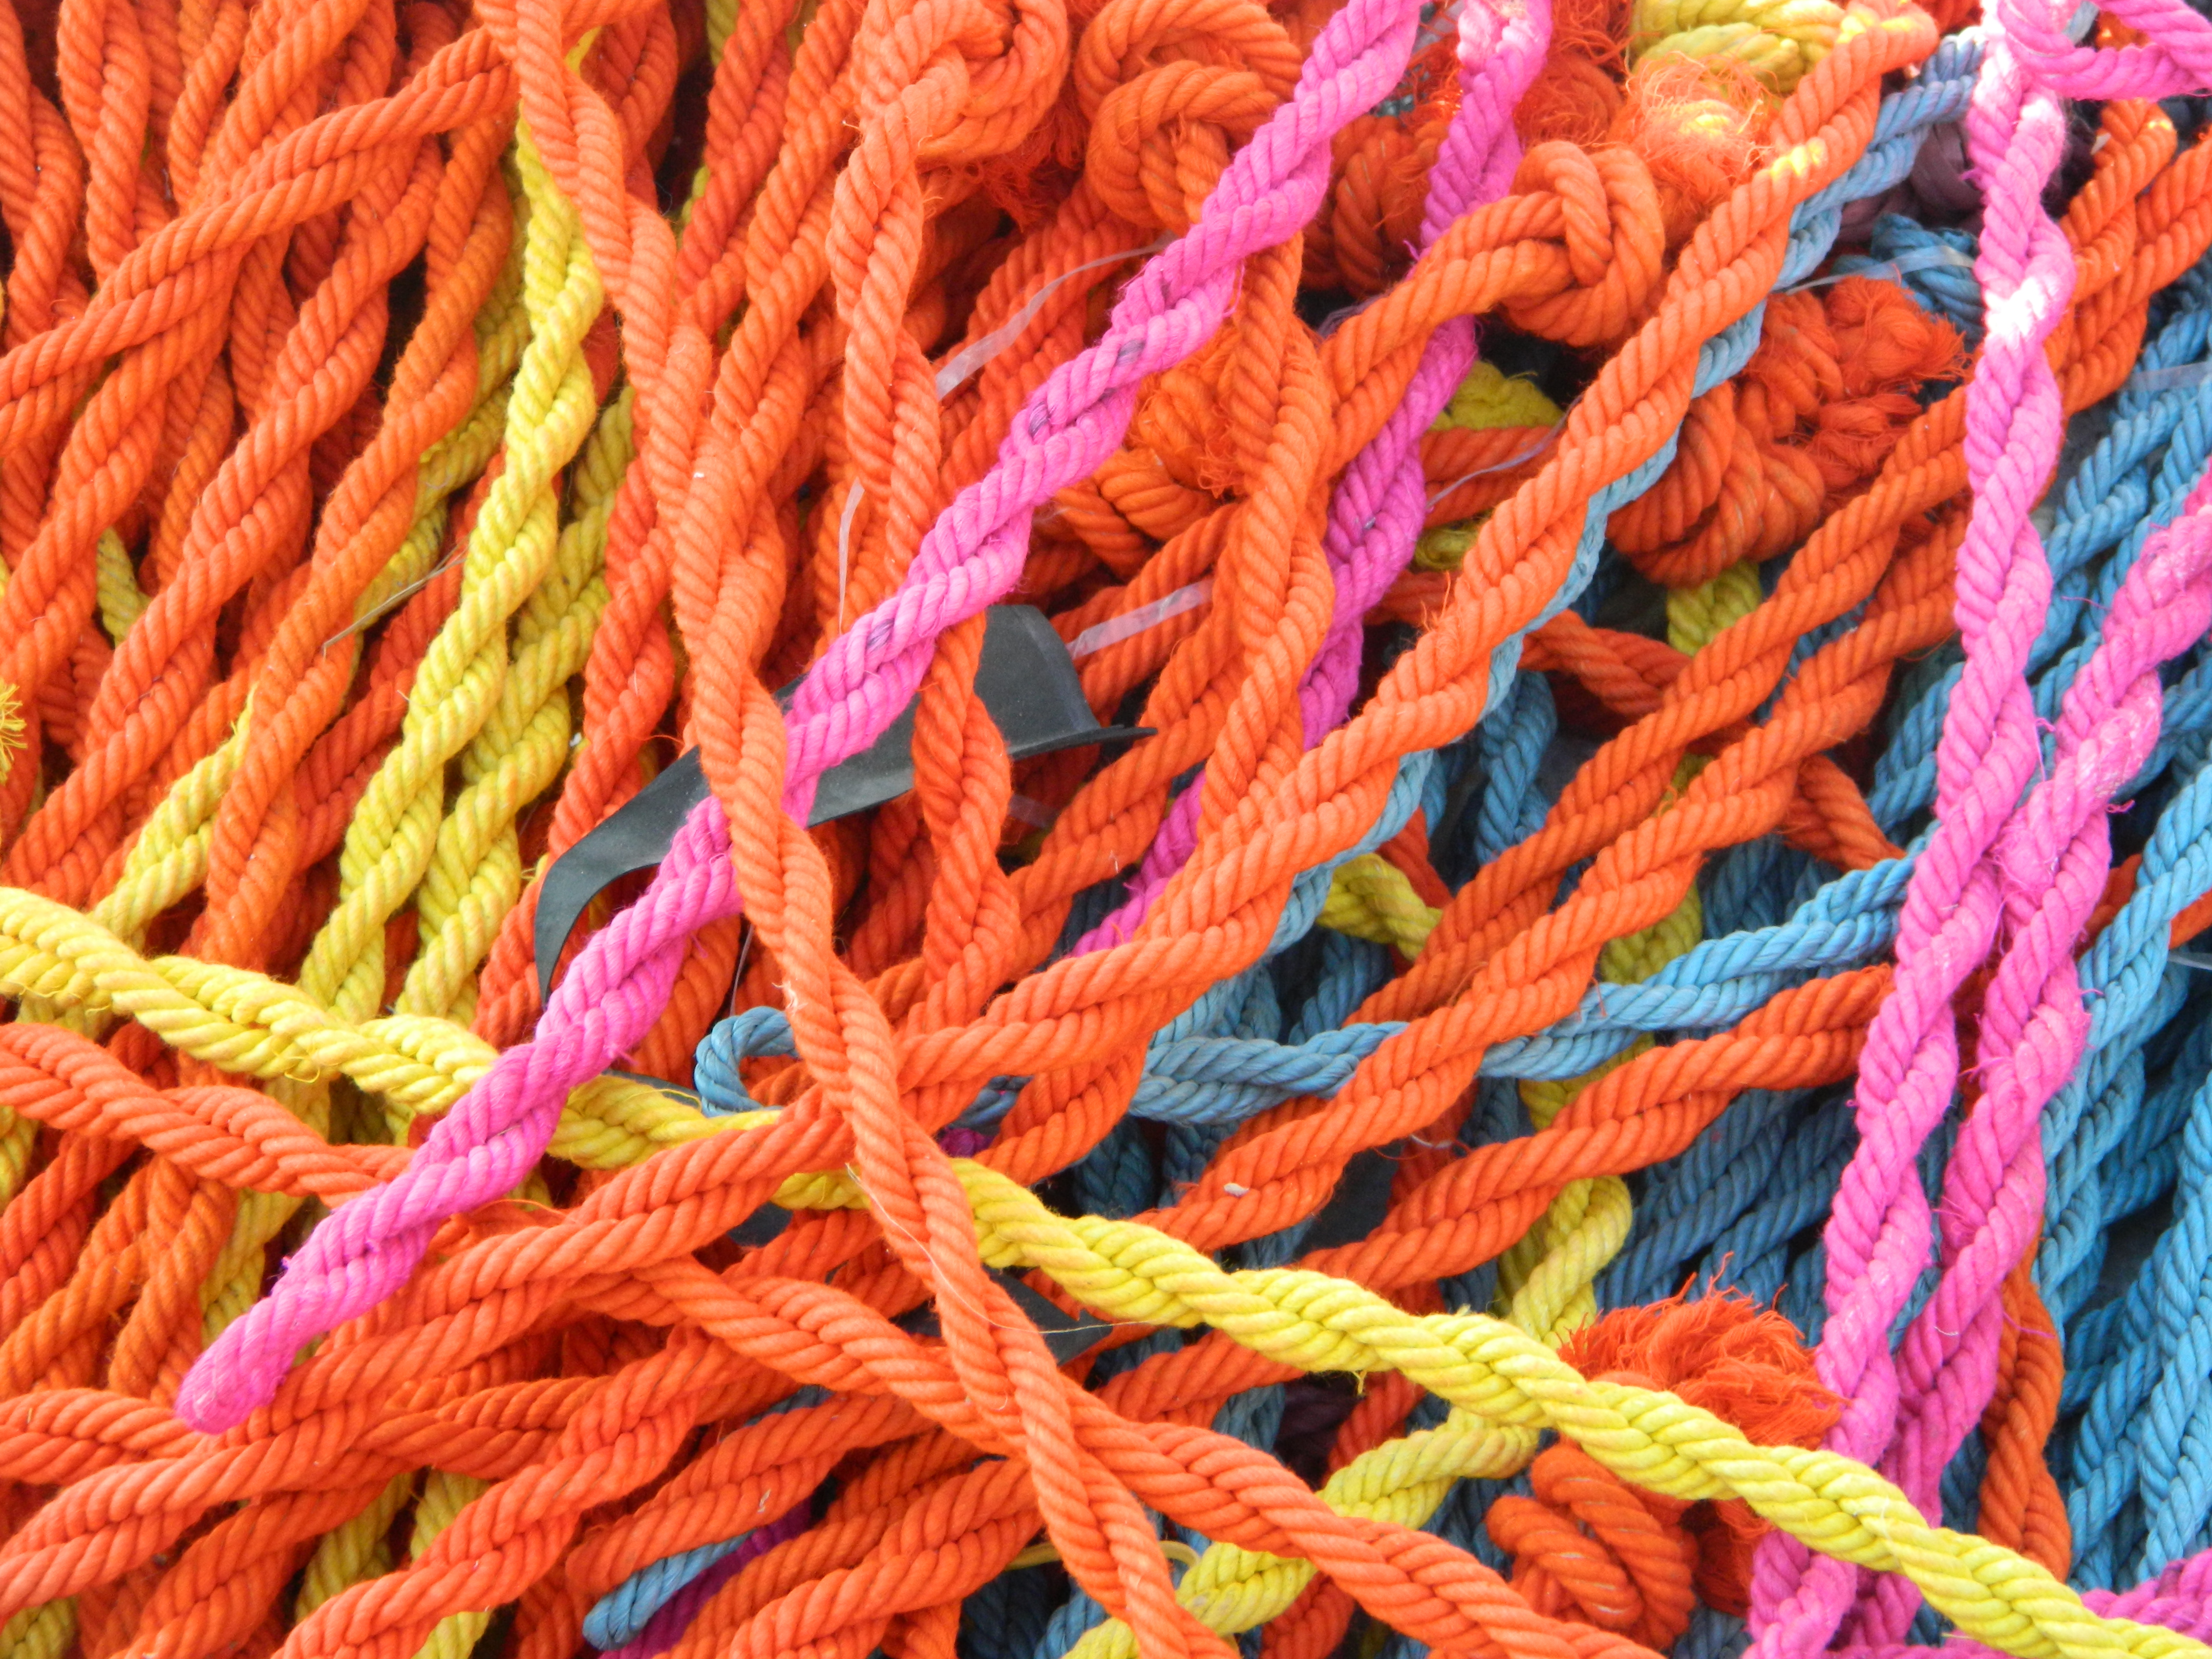 File:A aesthetic colour ropes.JPG - Wikimedia Commons